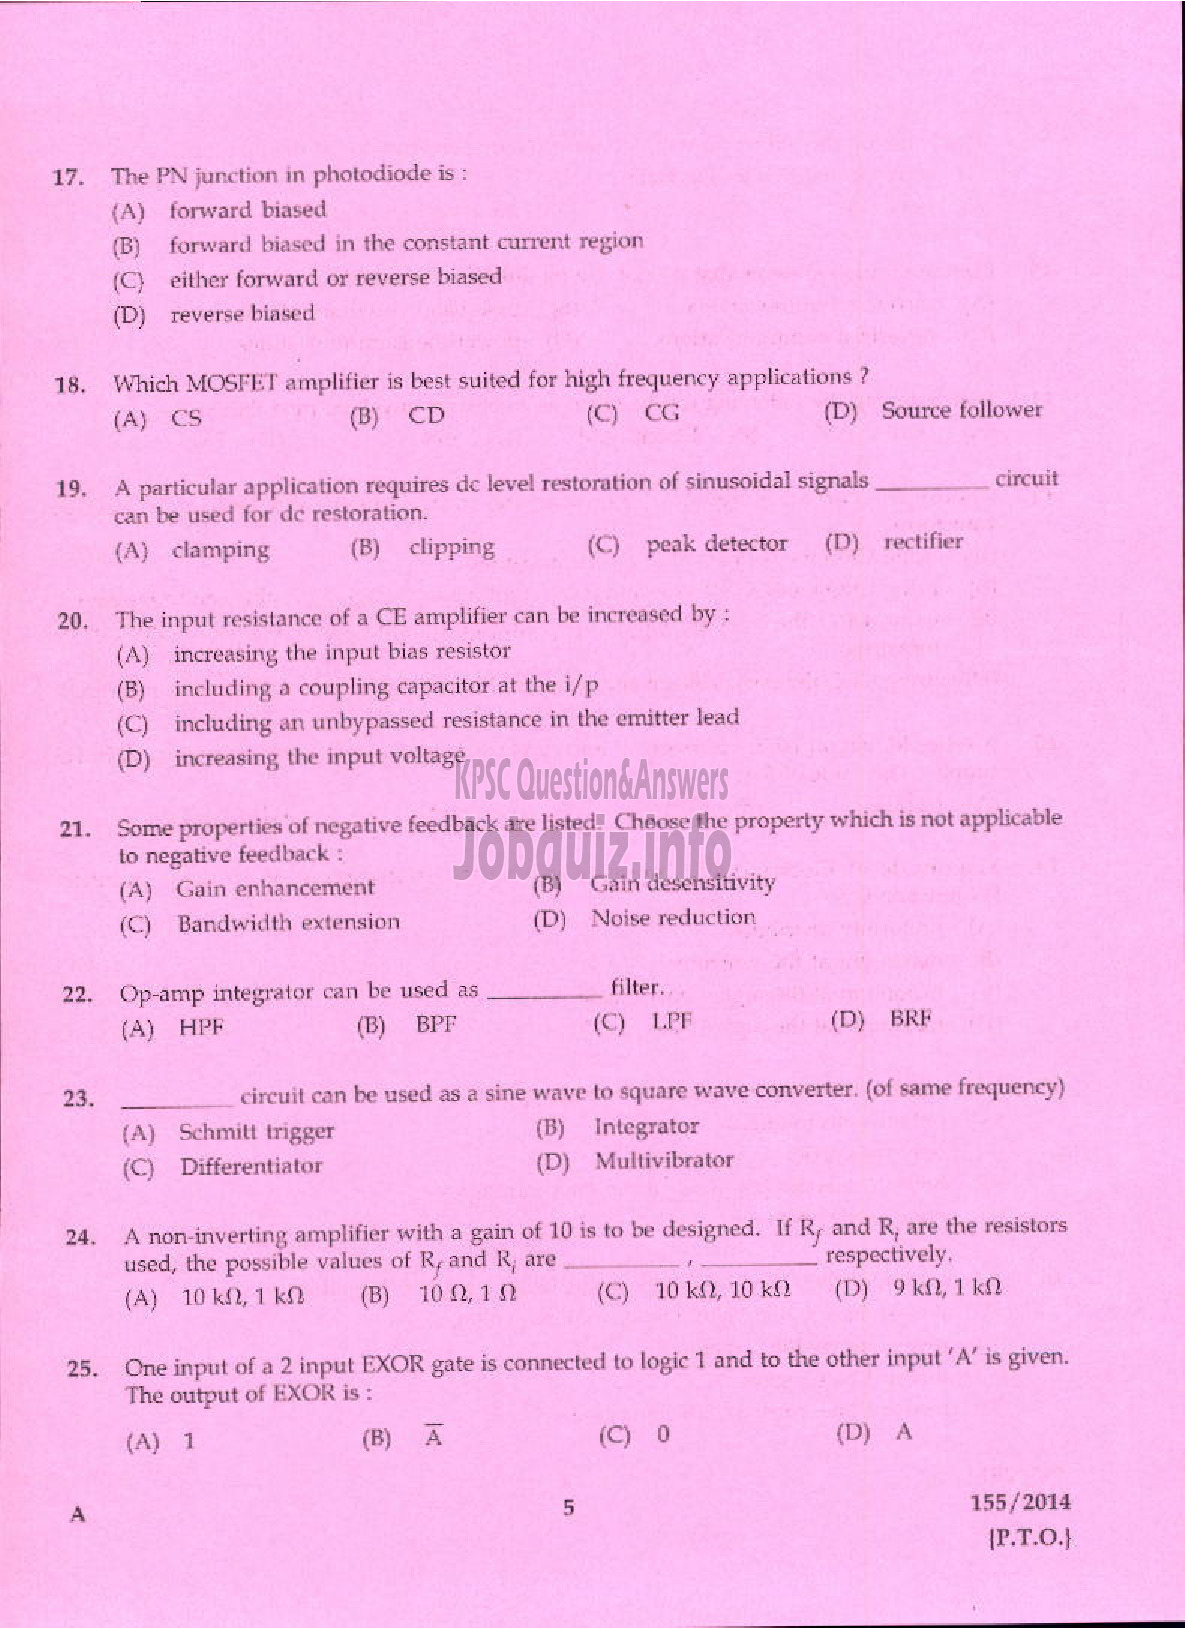 Kerala PSC Question Paper - INSTRUCTOR GR I ELECTRONICS ENGINEERING COLLEGES TECHNICAL EDUCATION-3